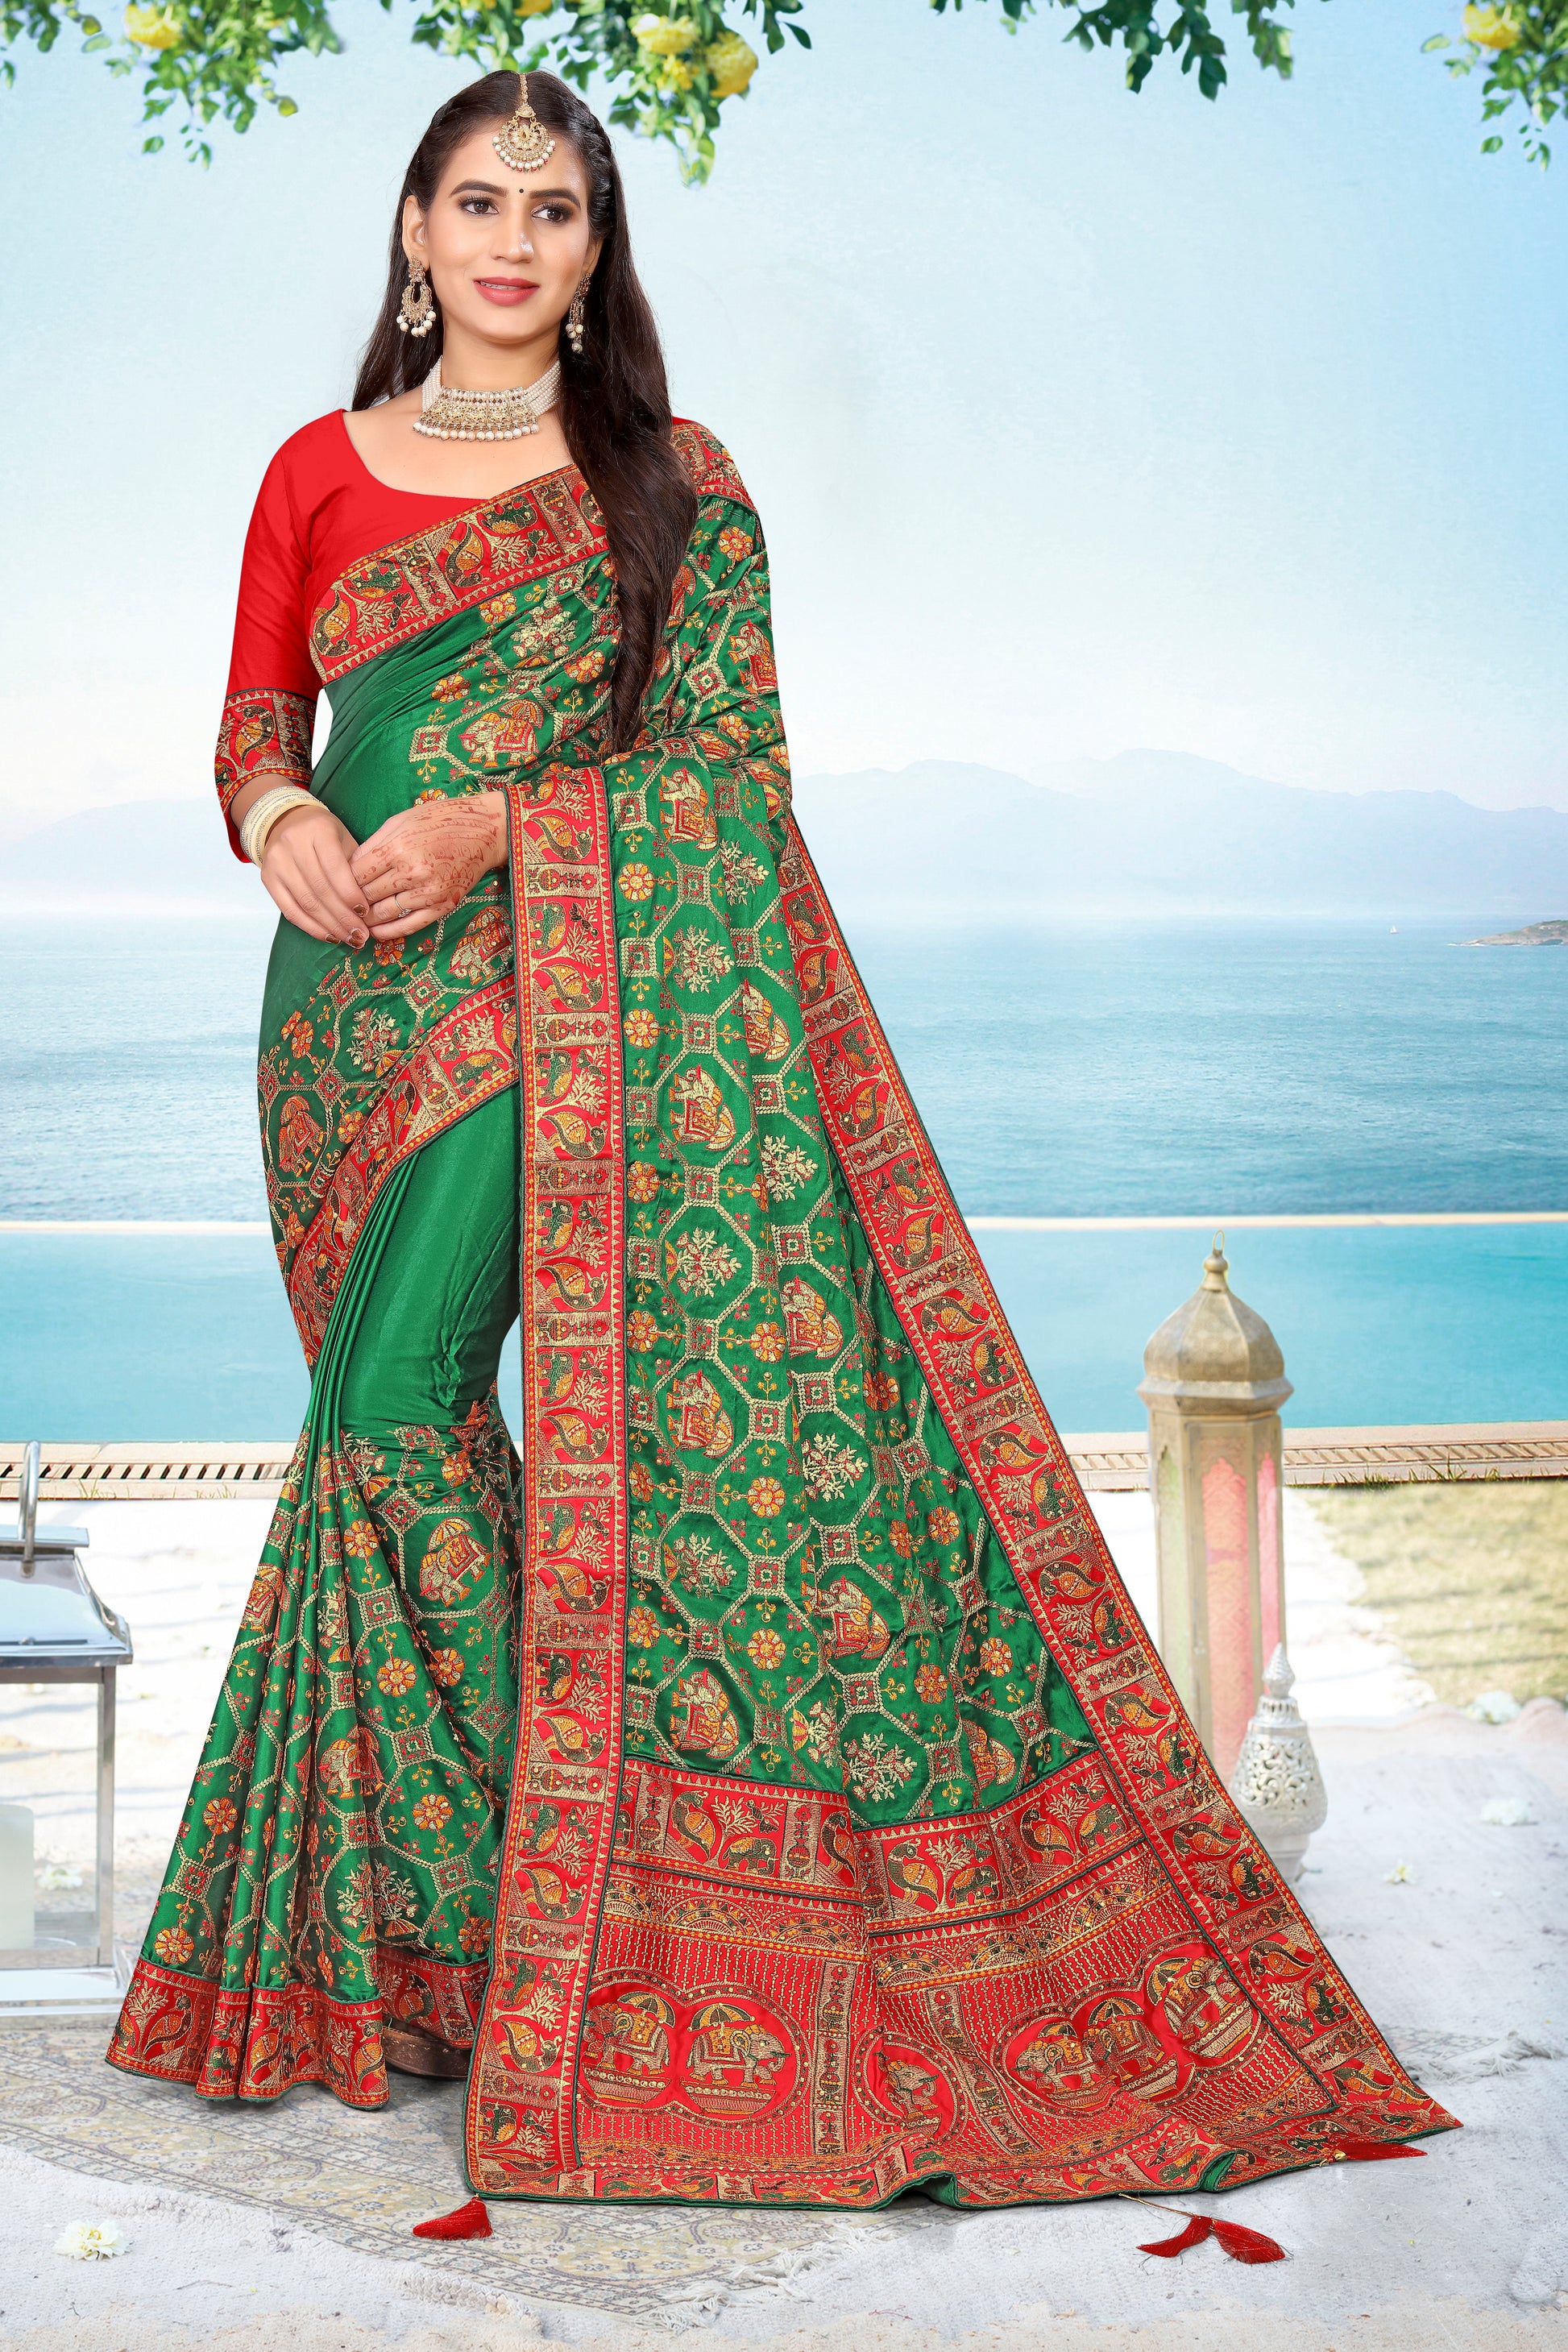 HEAVY TRADITIONAL GREEN WITH BORDER IN RED, GHARCHOLA MADE OF GAJI SILK FOR WEDDING IN 5 MORE WEDDING COLORS FOR ALL FUNCTIONS.